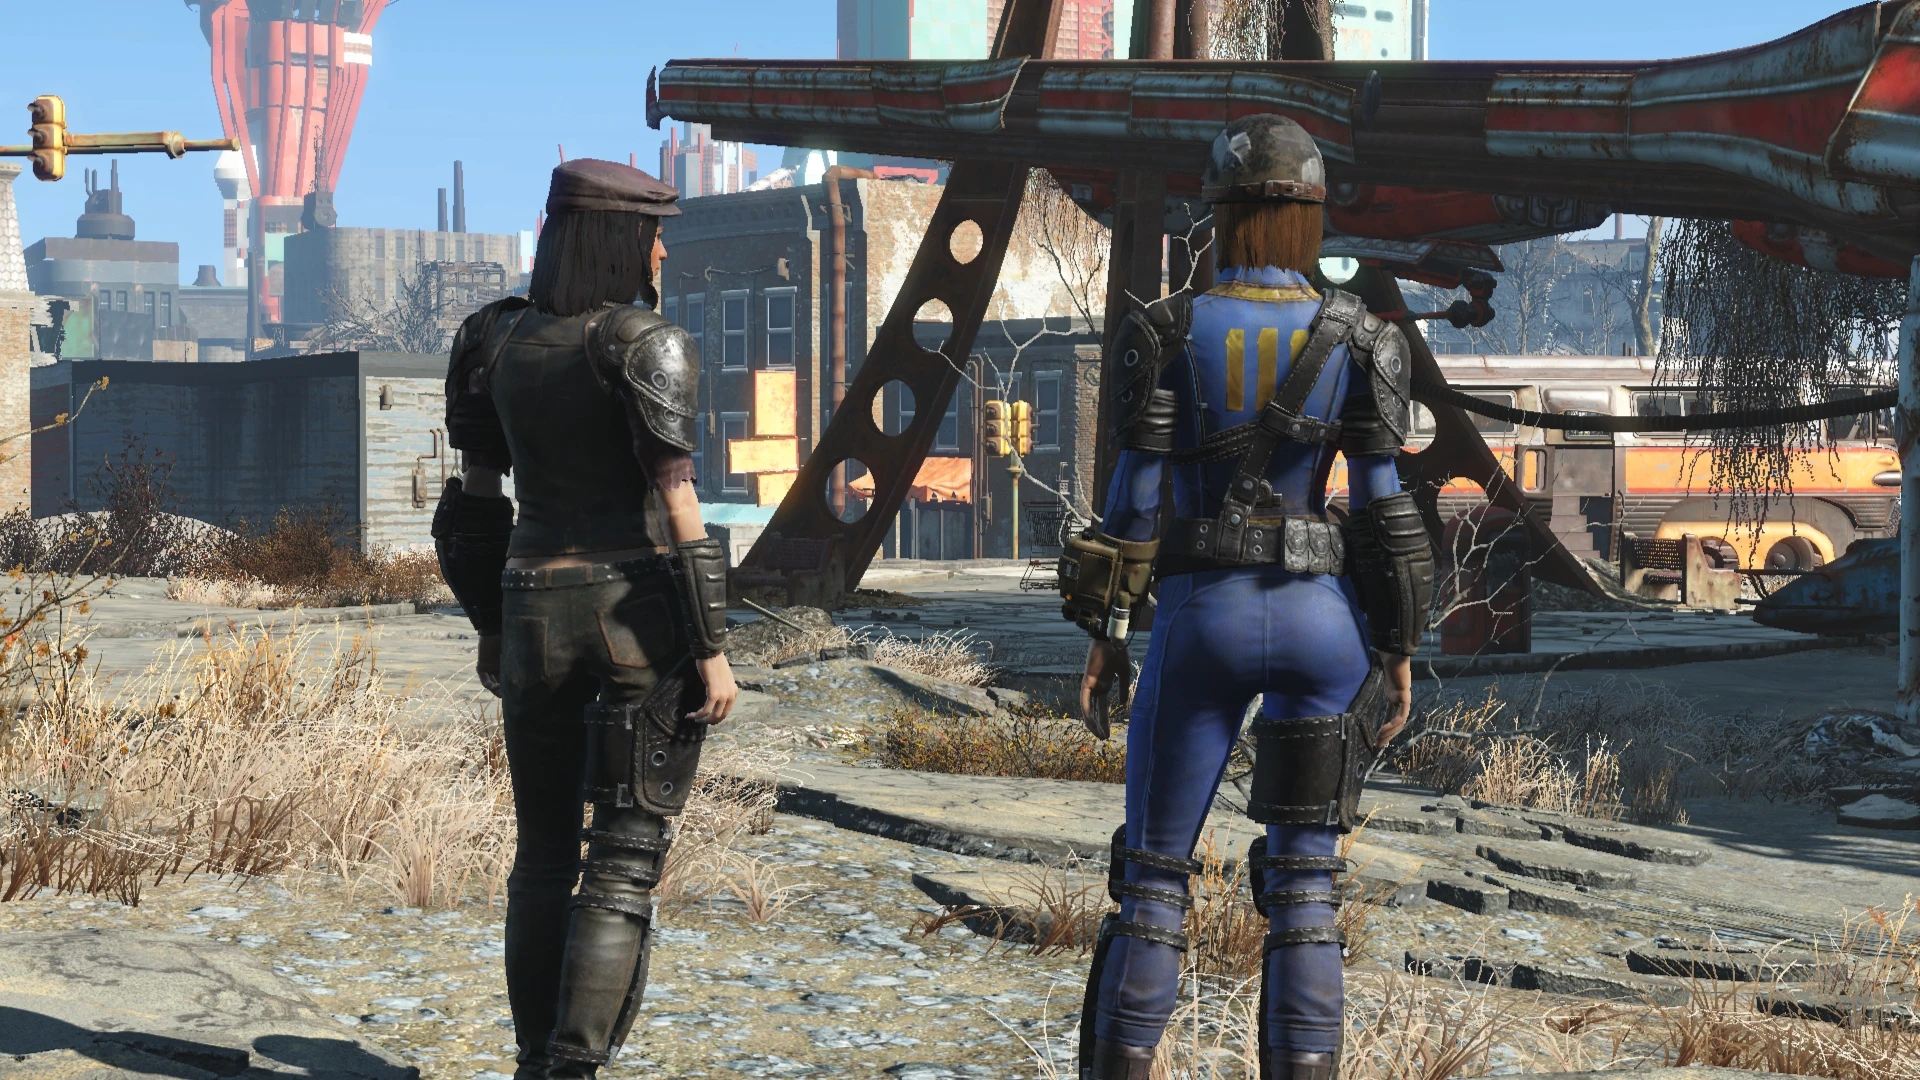 Fallout new nexus. Courser фоллаут 4. Нексус мод фоллаут 4. Фоллаут 4 мод трофеи. Фоллаут 4 сузи.